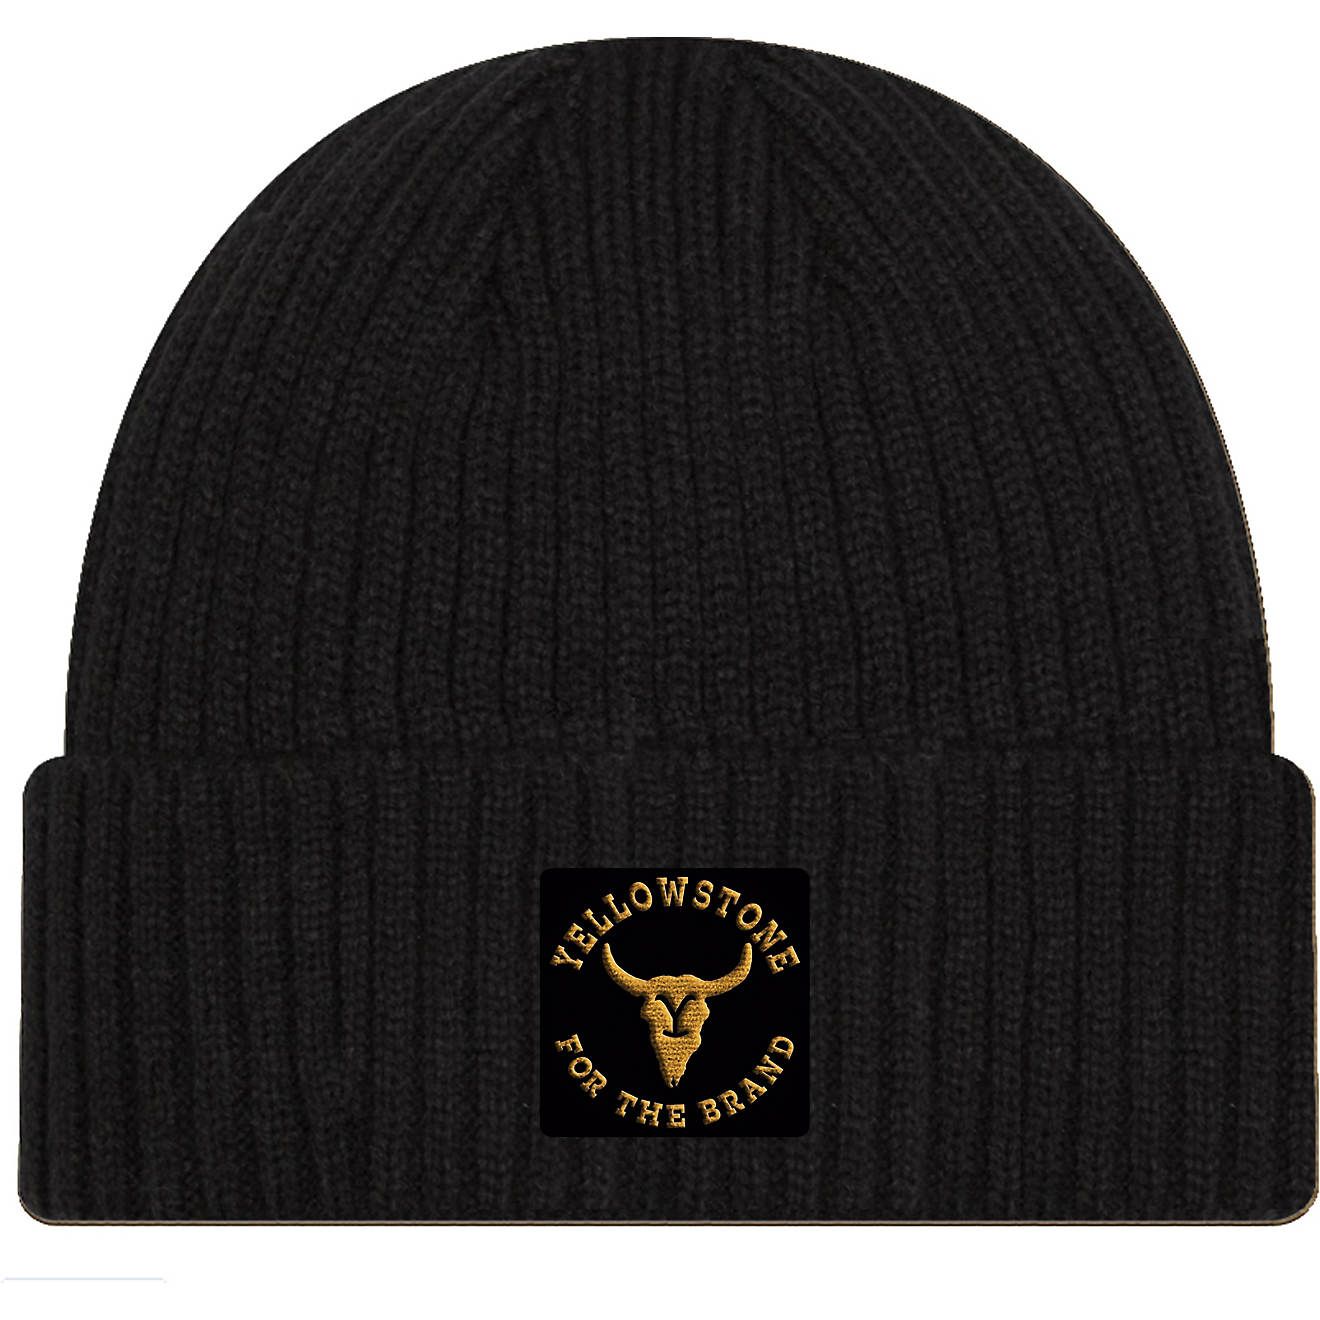 Yellowstone For The Brand Beanie | Academy | Academy Sports + Outdoors